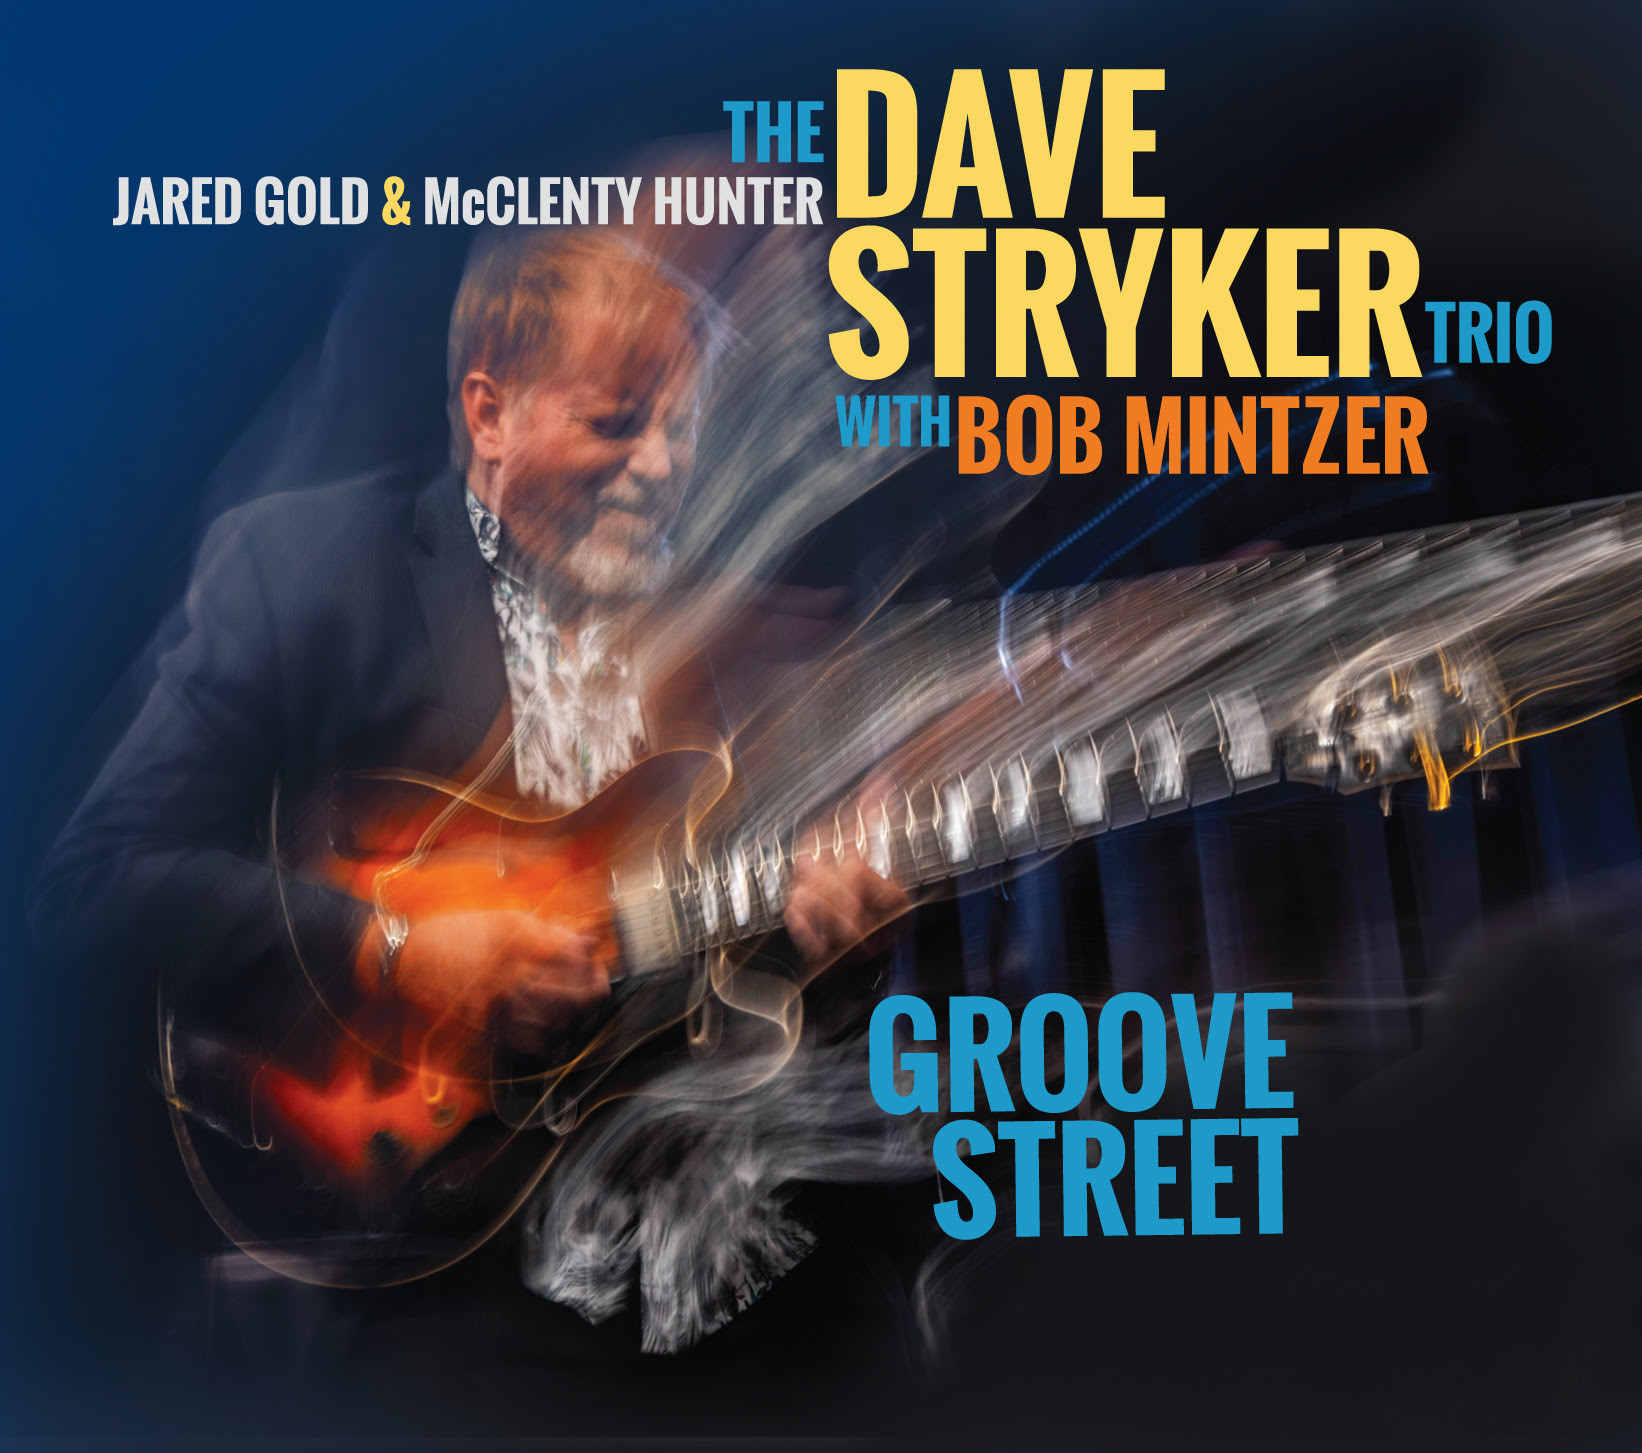 Dave Stryker Celebrates the Release of "Groove Street" with a Series of Dynamic Live Shows